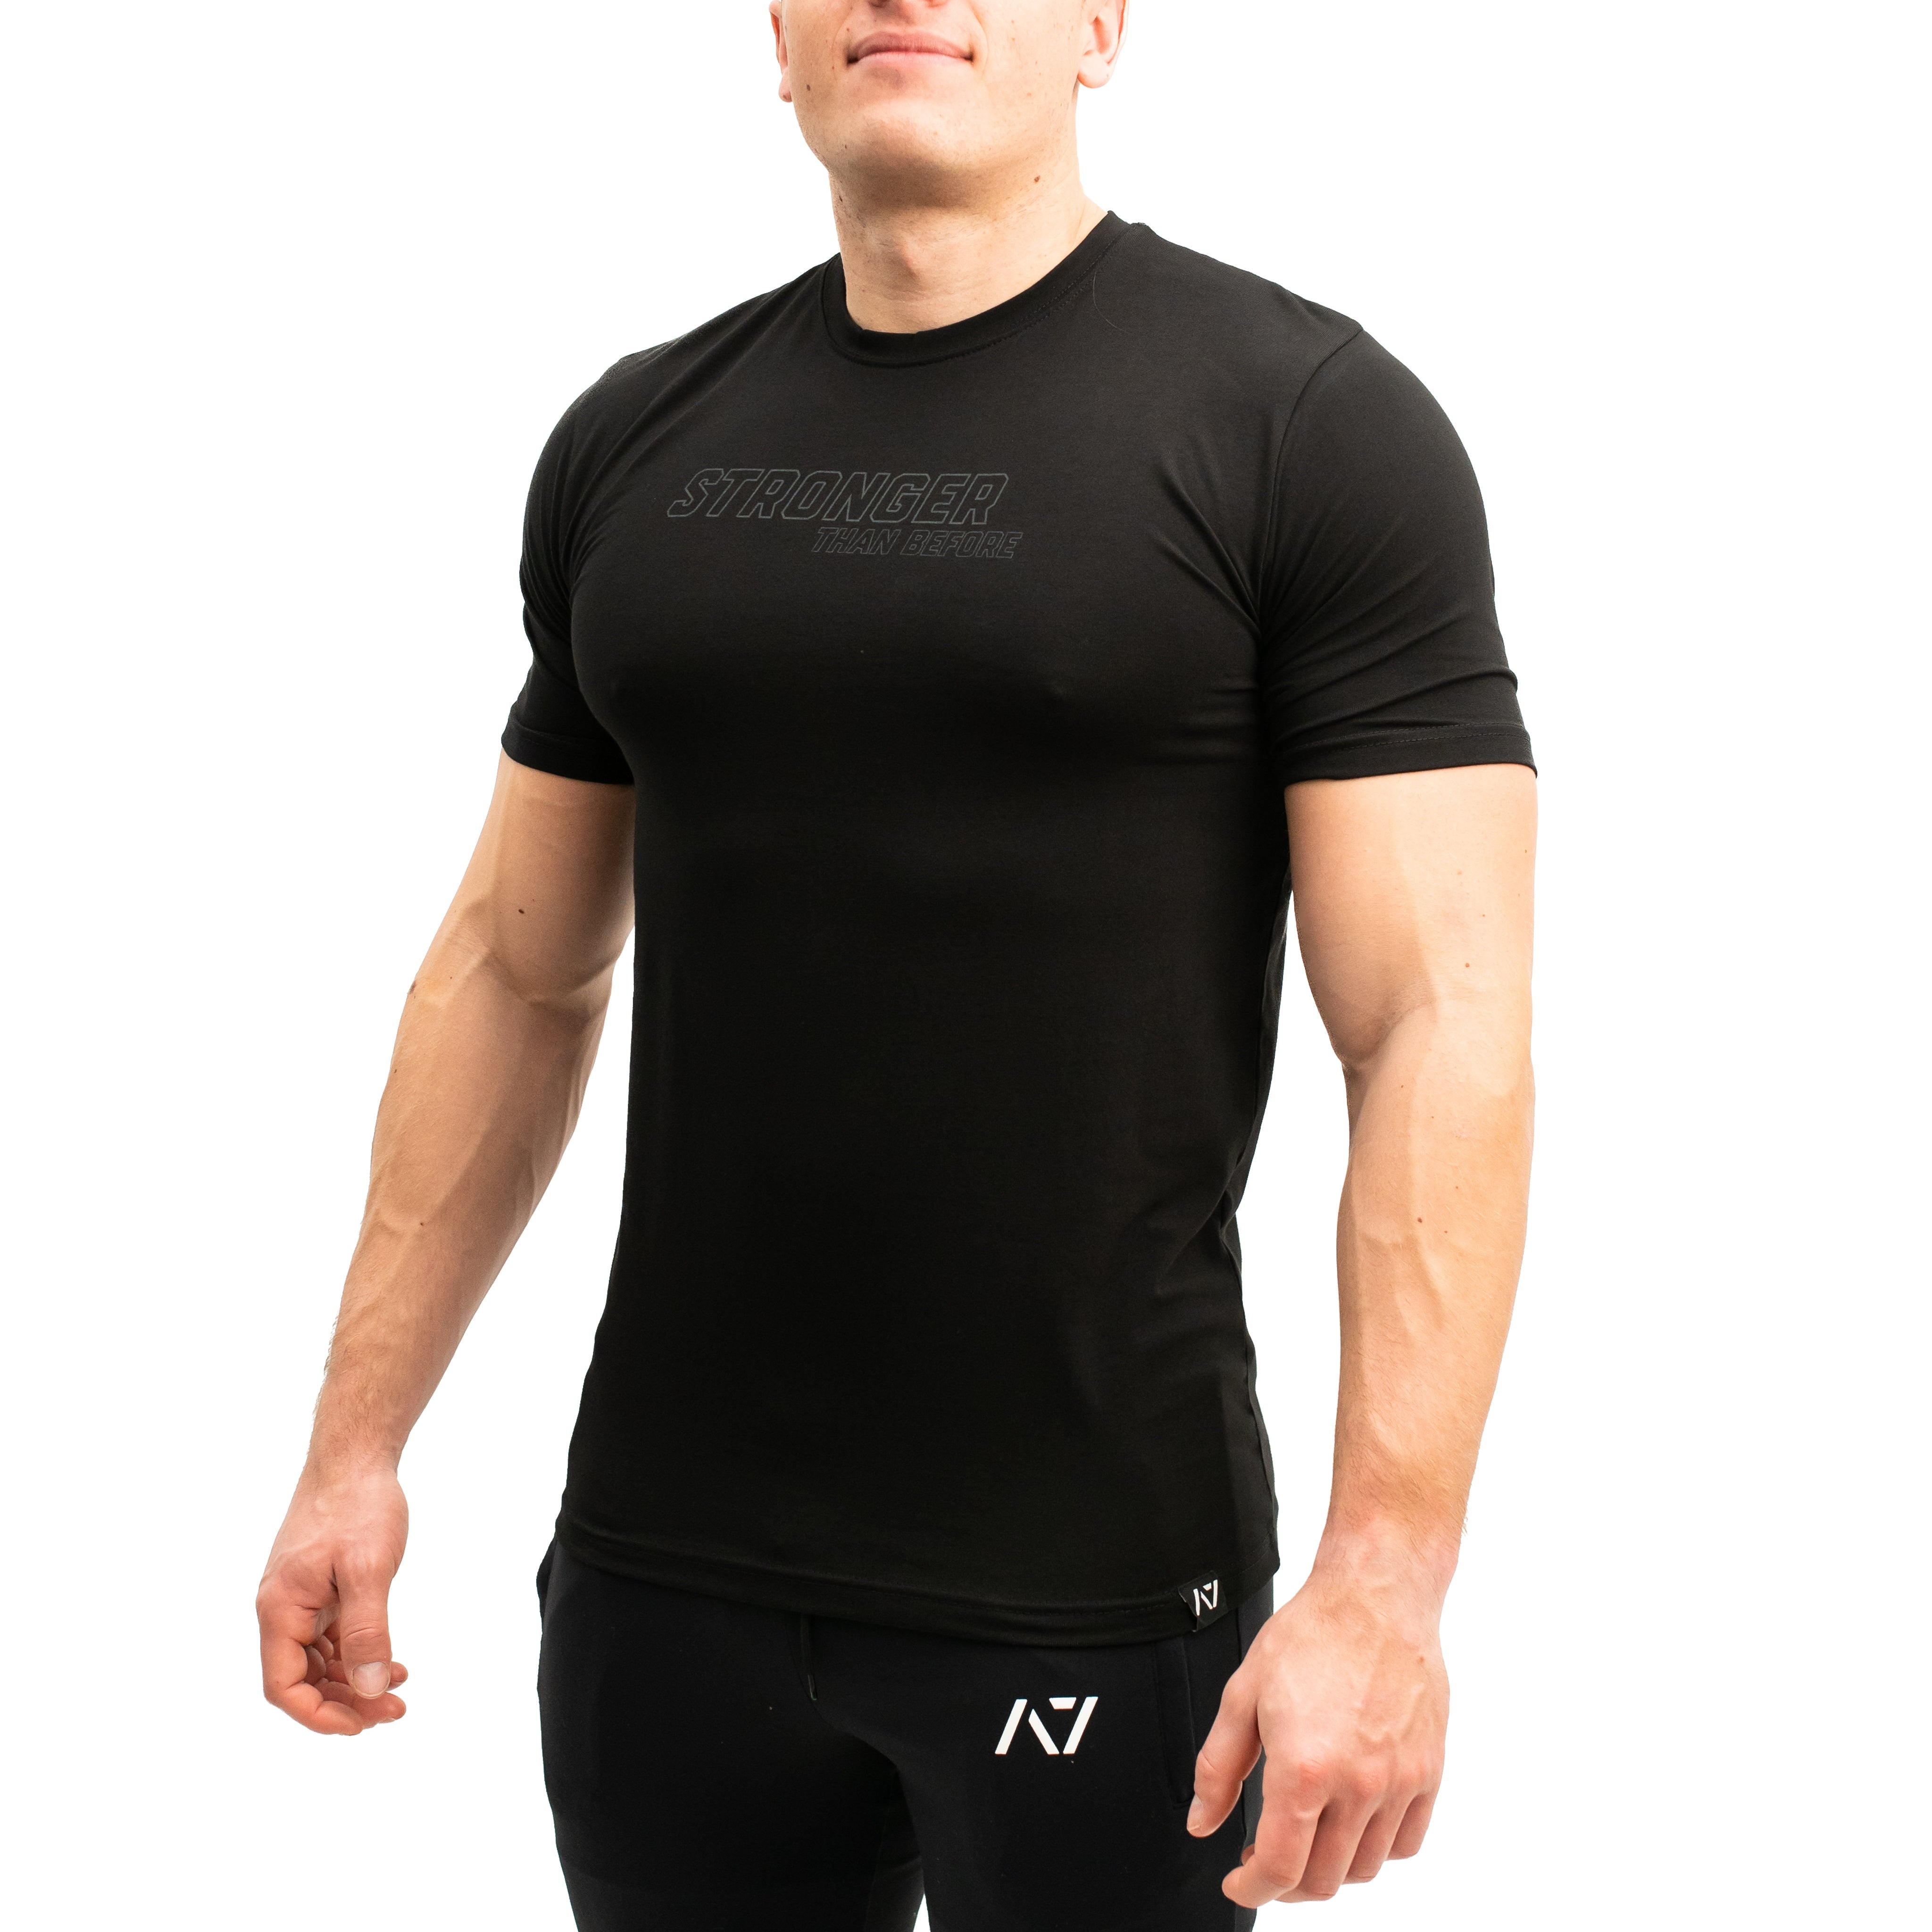 The Conquer Bar Grip Shirt reminds us we can conquer challenges and make an impact. The future is only the continuation of our progress. Purchase Conquer Bar Grip from A7 UK and A7 Europe. The silicone grip helps with slippery commercial benches and bars and anchors the barbell to your back. A7UK has the best Powerlifting apparel for all workouts. Available in UK and Europe including France, Italy, Germany, the Netherlands, Sweden and Poland.